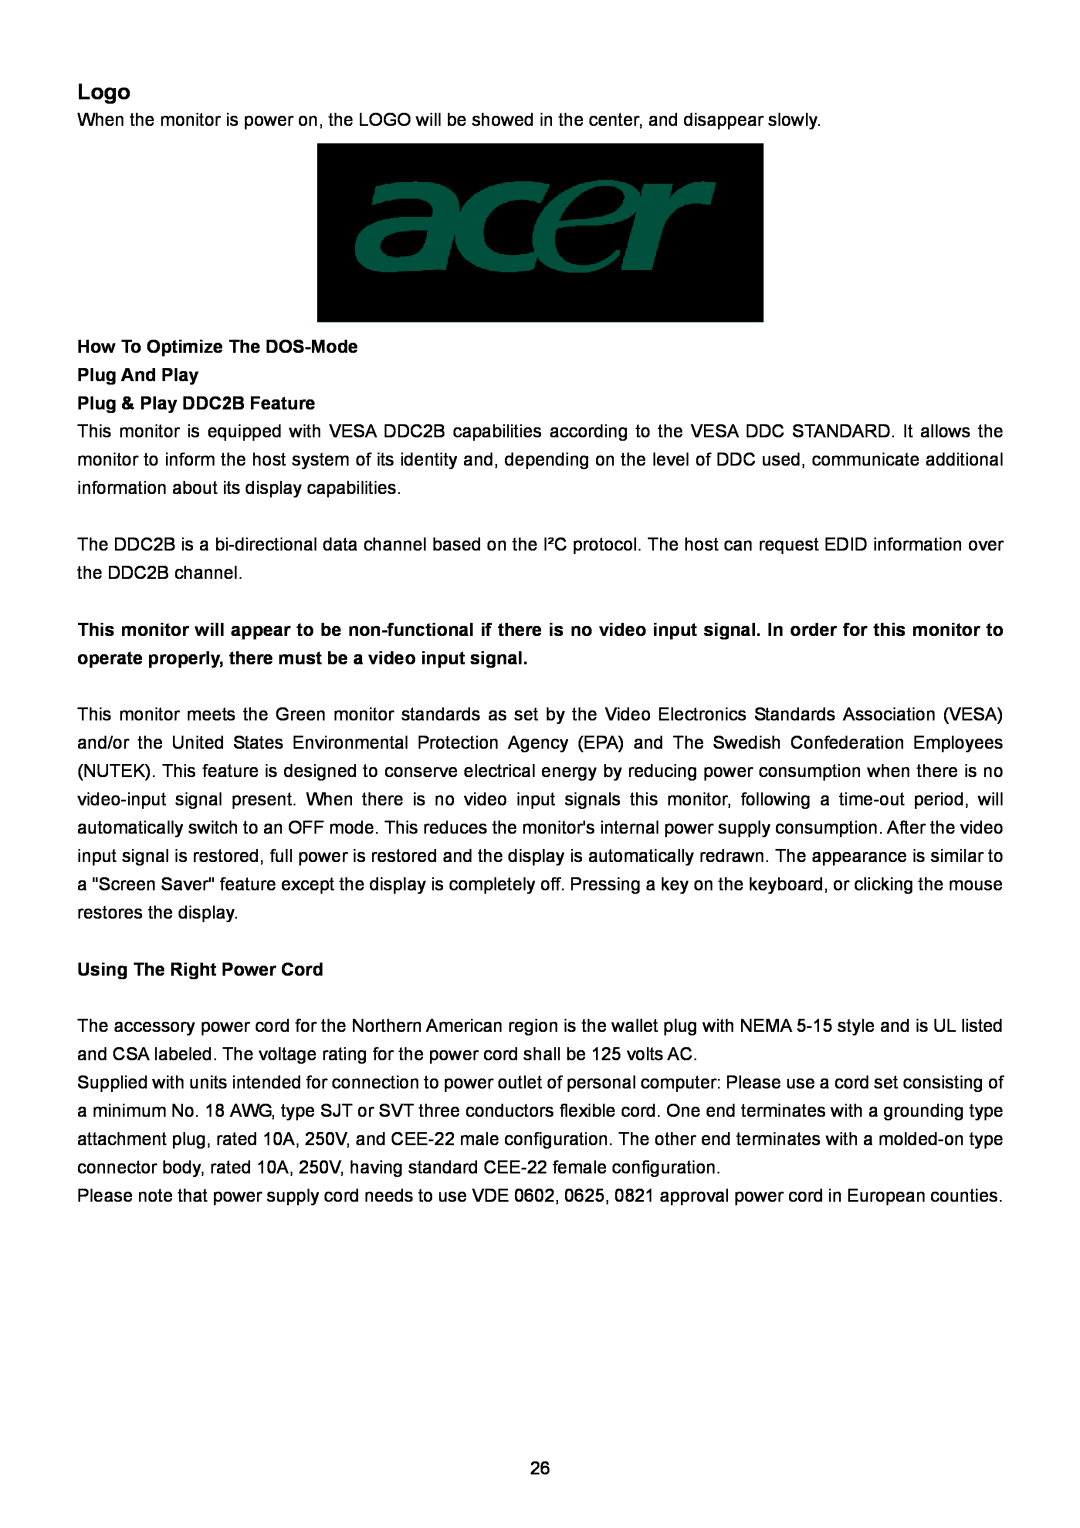 Acer B193R manual Logo, How To Optimize The DOS-Mode Plug And Play Plug & Play DDC2B Feature, Using The Right Power Cord 